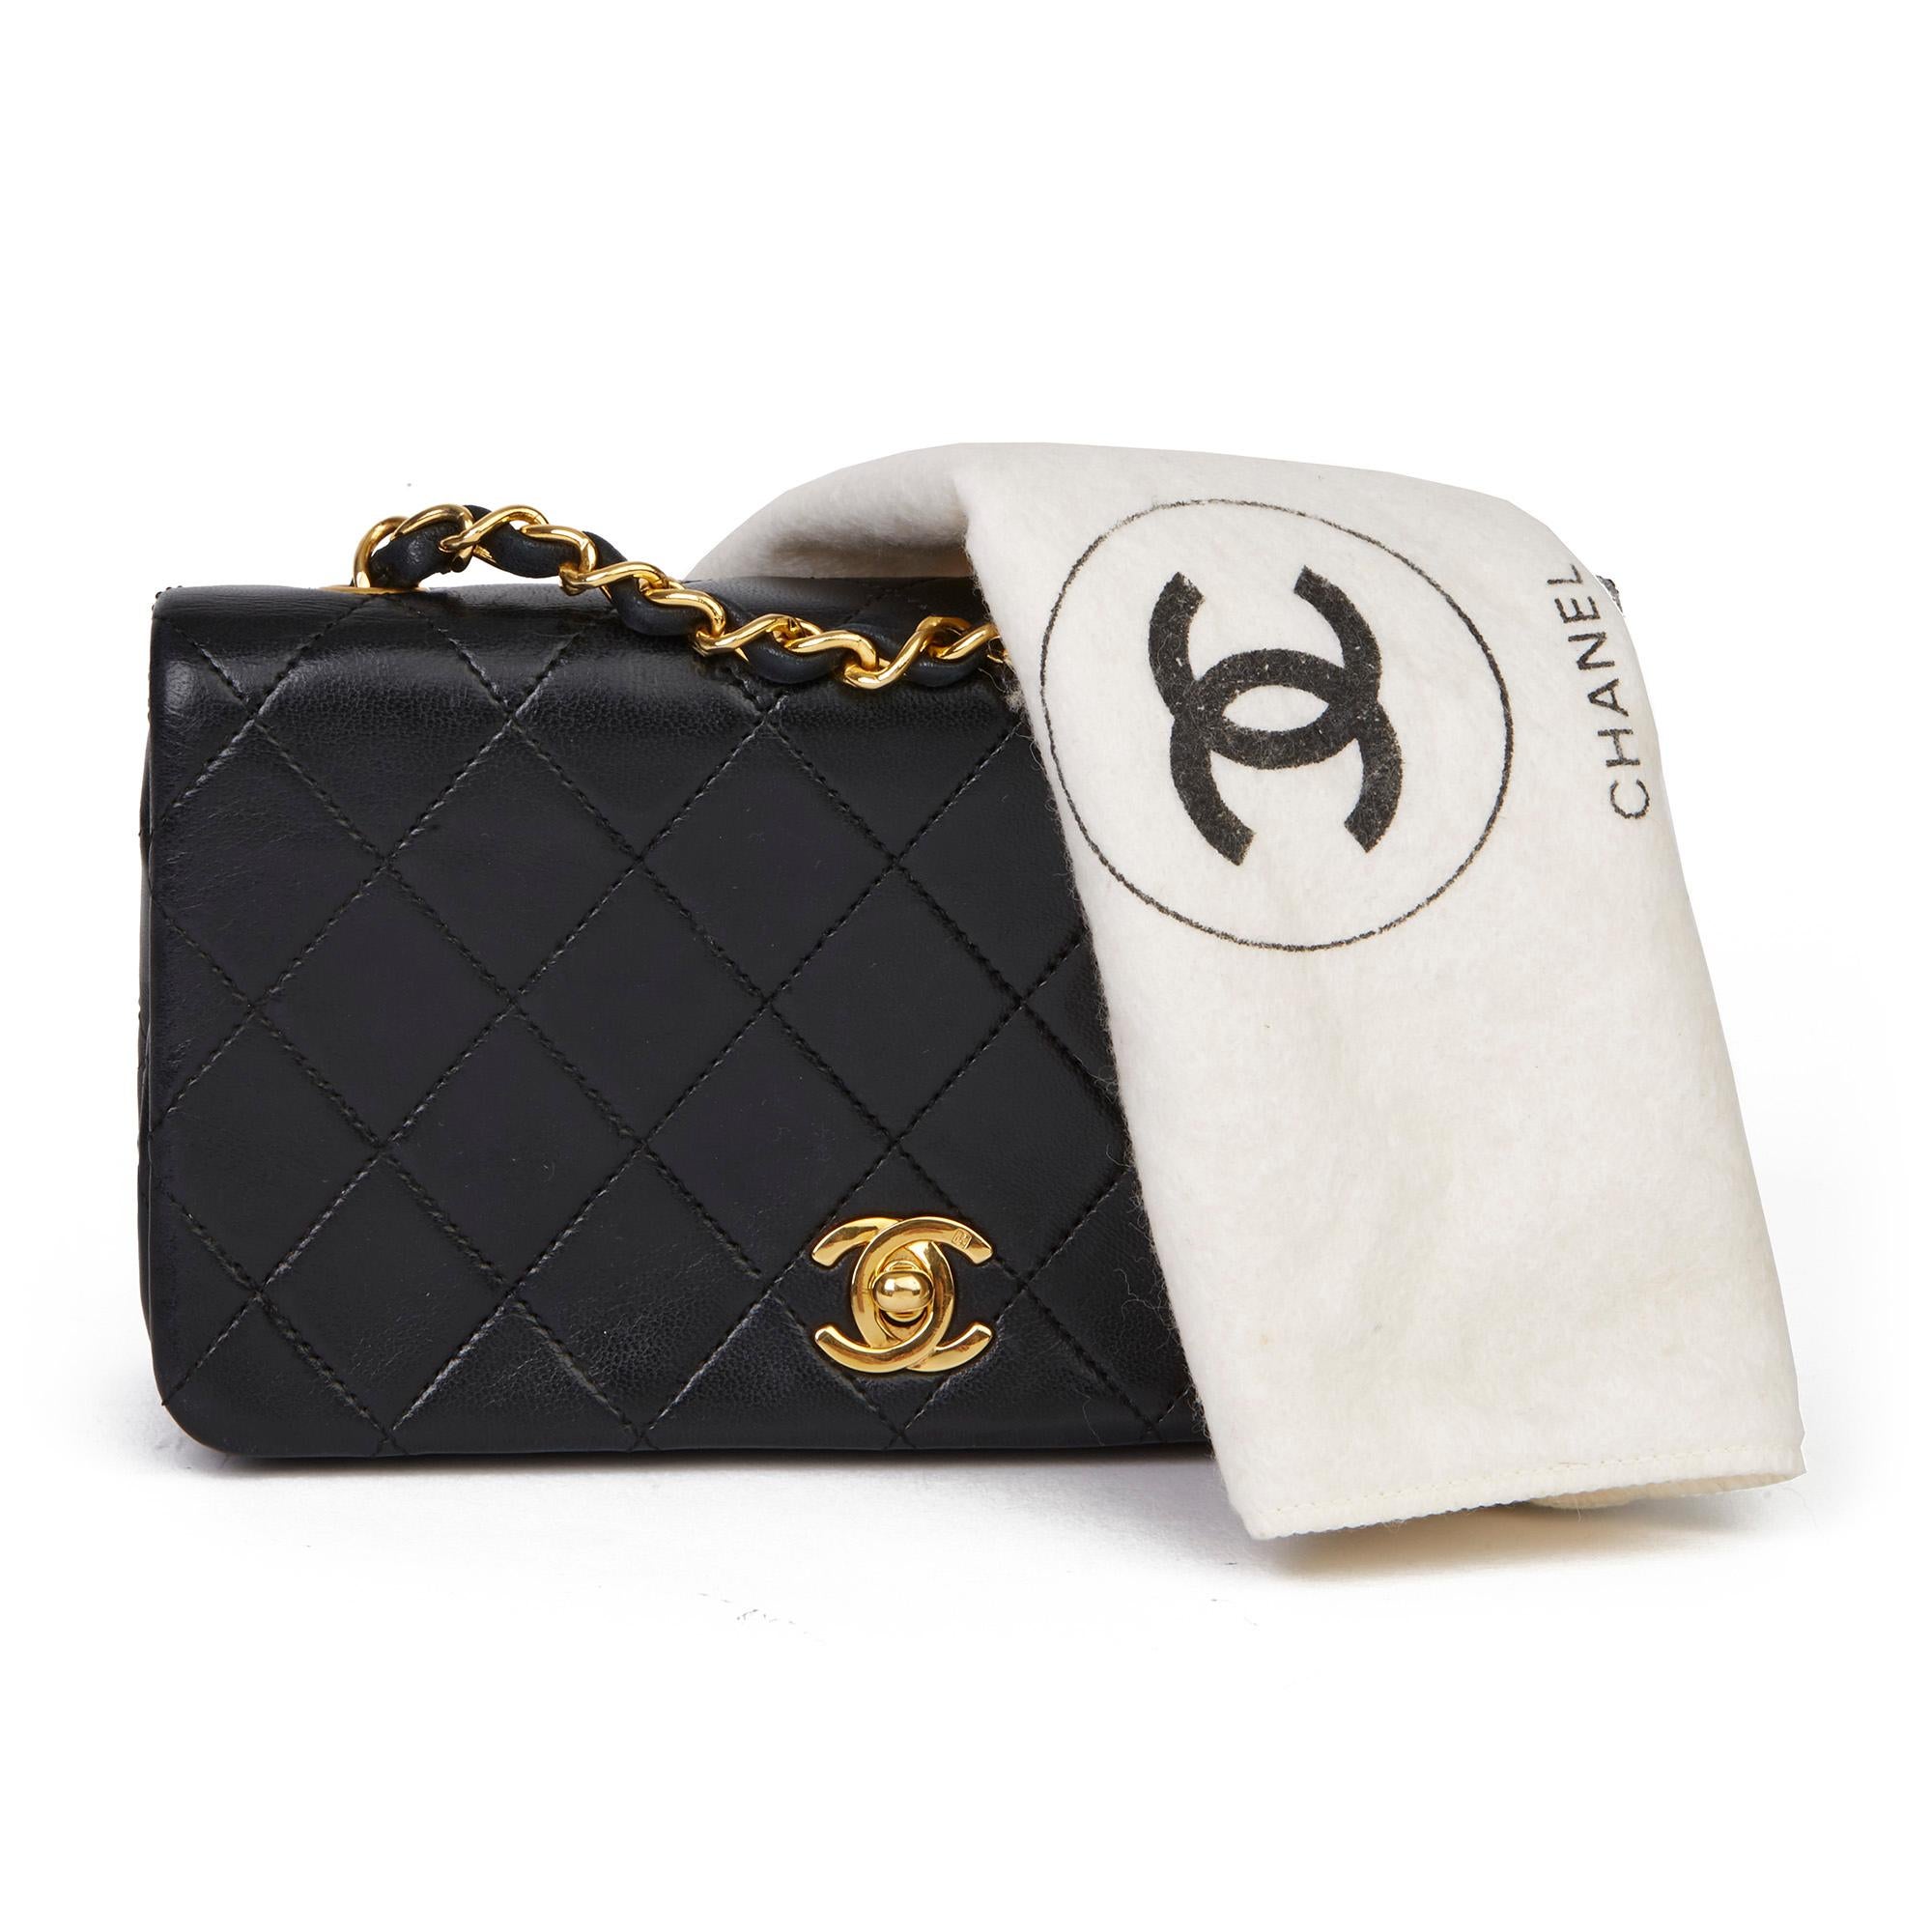 1994 Chanel Black Quilted Lambskin Vintage Mini Flap Bag  7